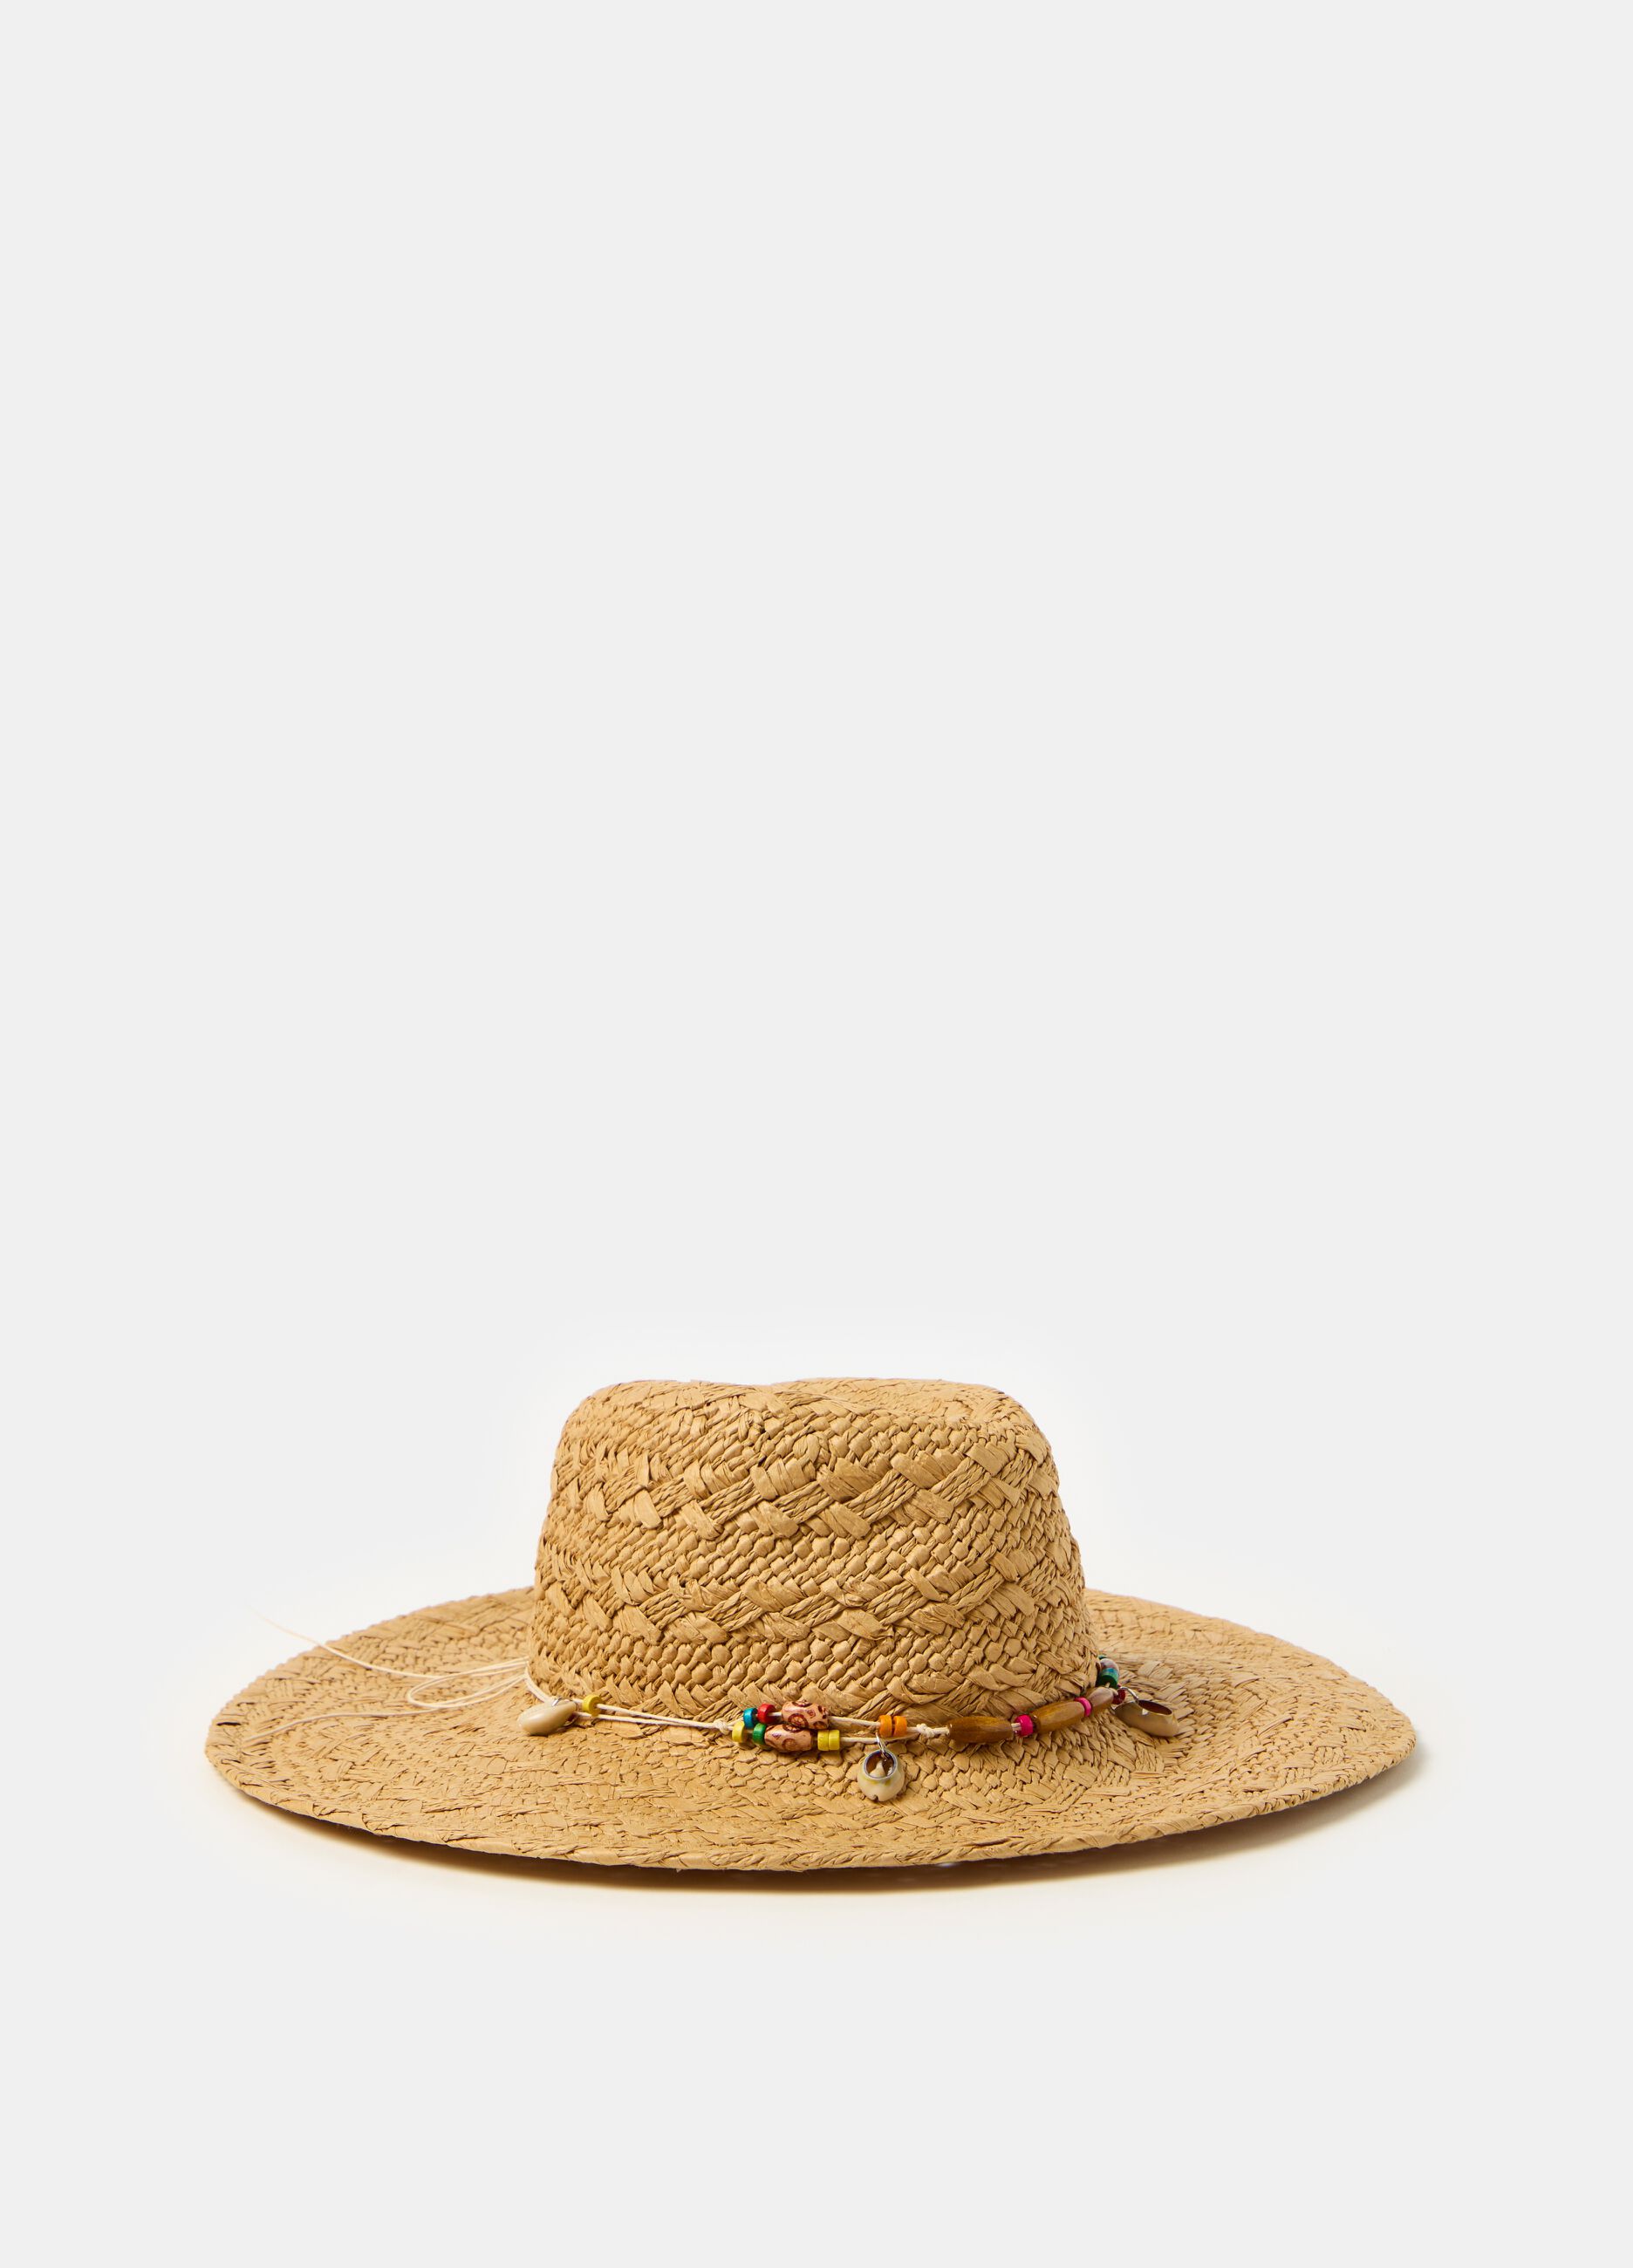 Straw hat with decorations